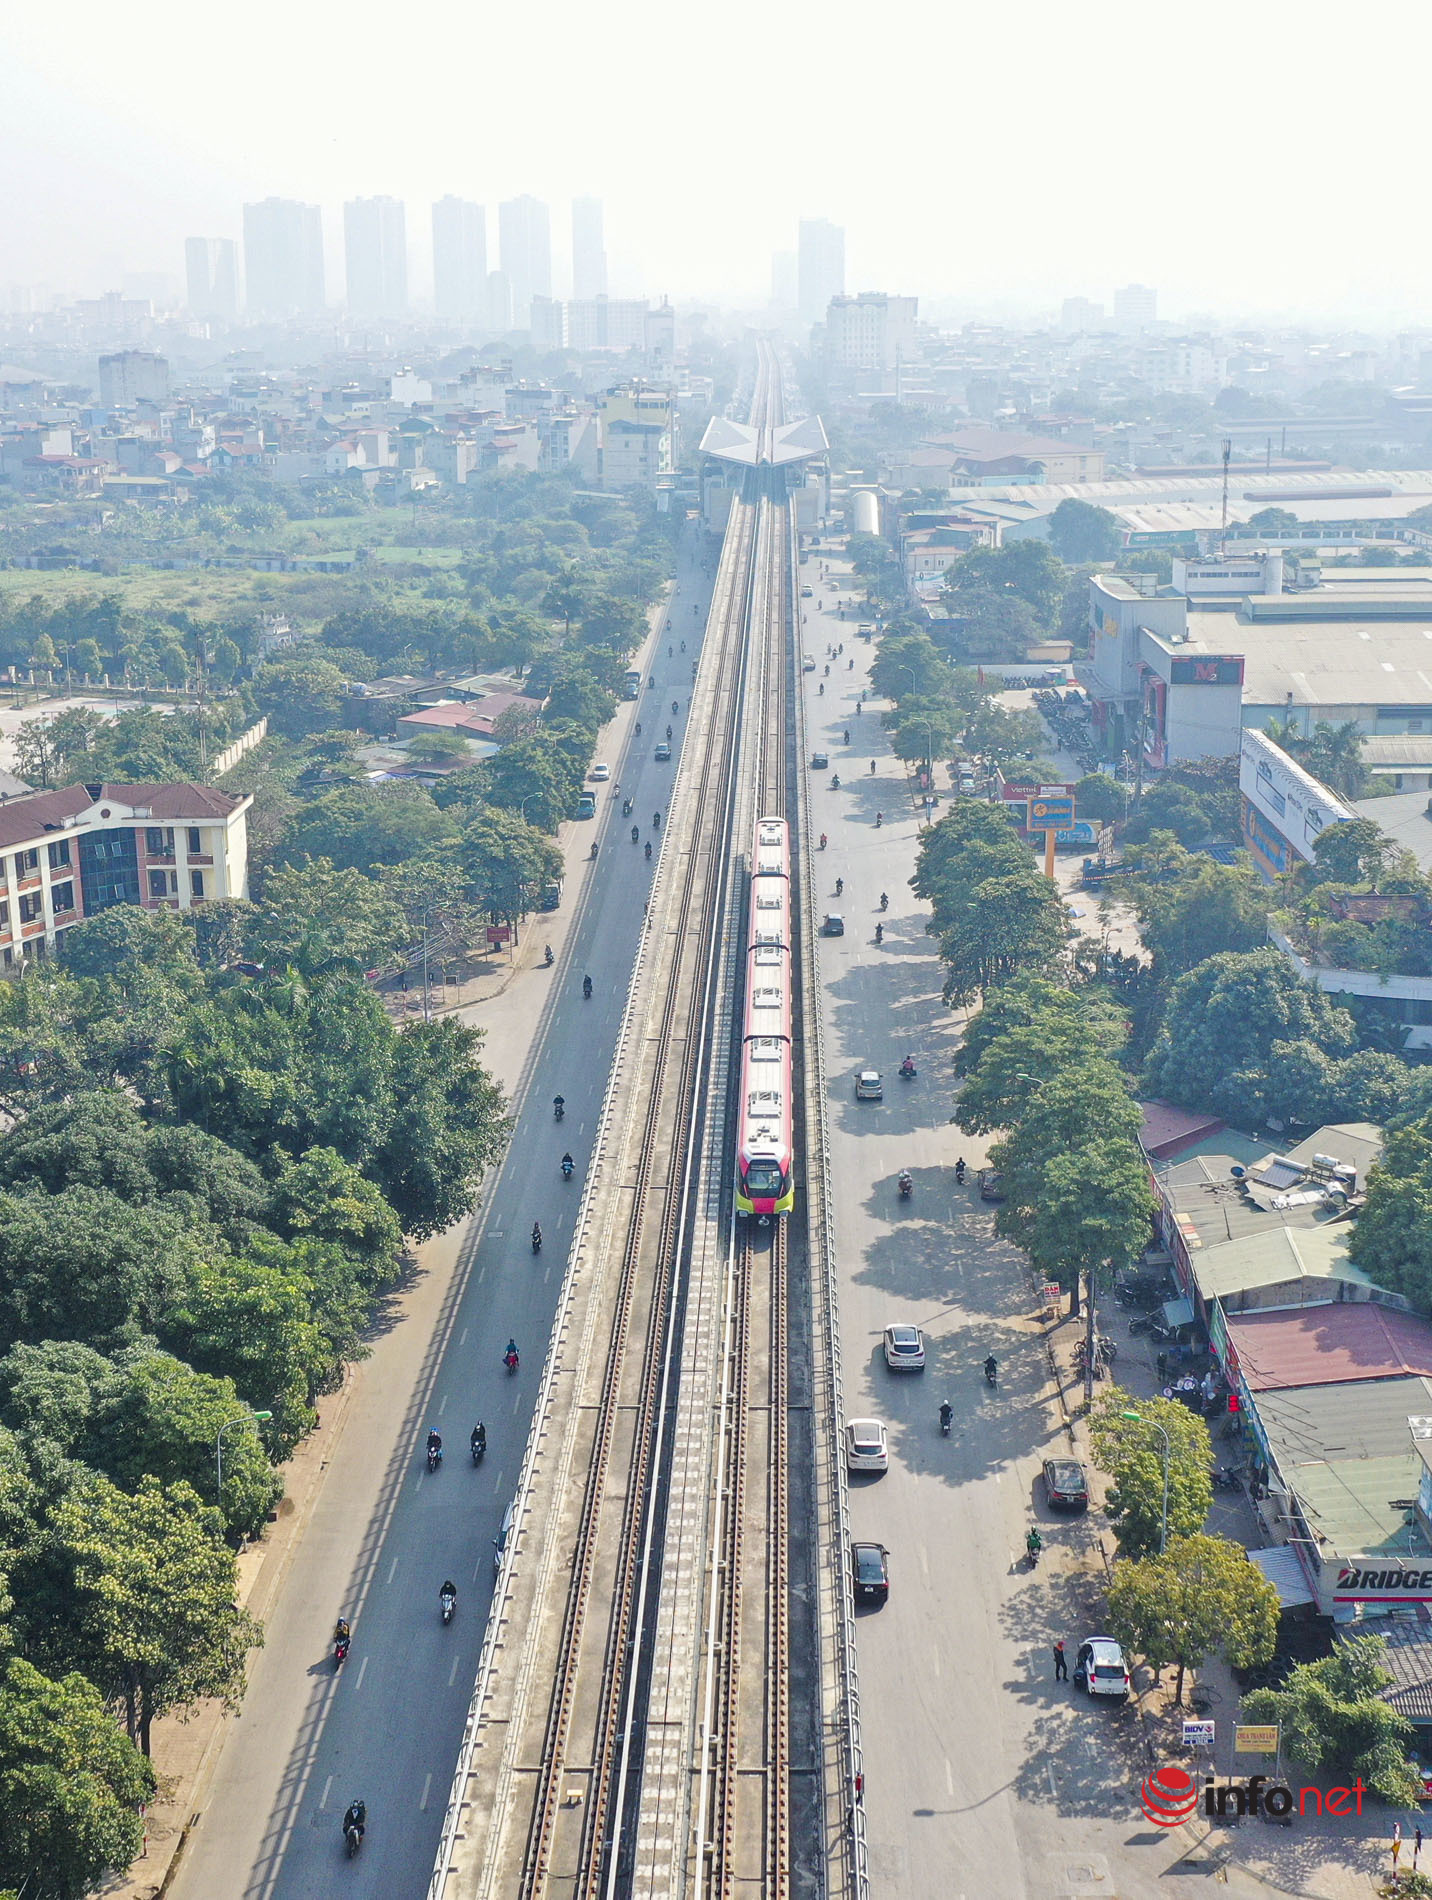 The project of 'super crawling' metro Nhon - Hanoi station after 12 years, the construction site is still sprawling, many sections are absent of workers